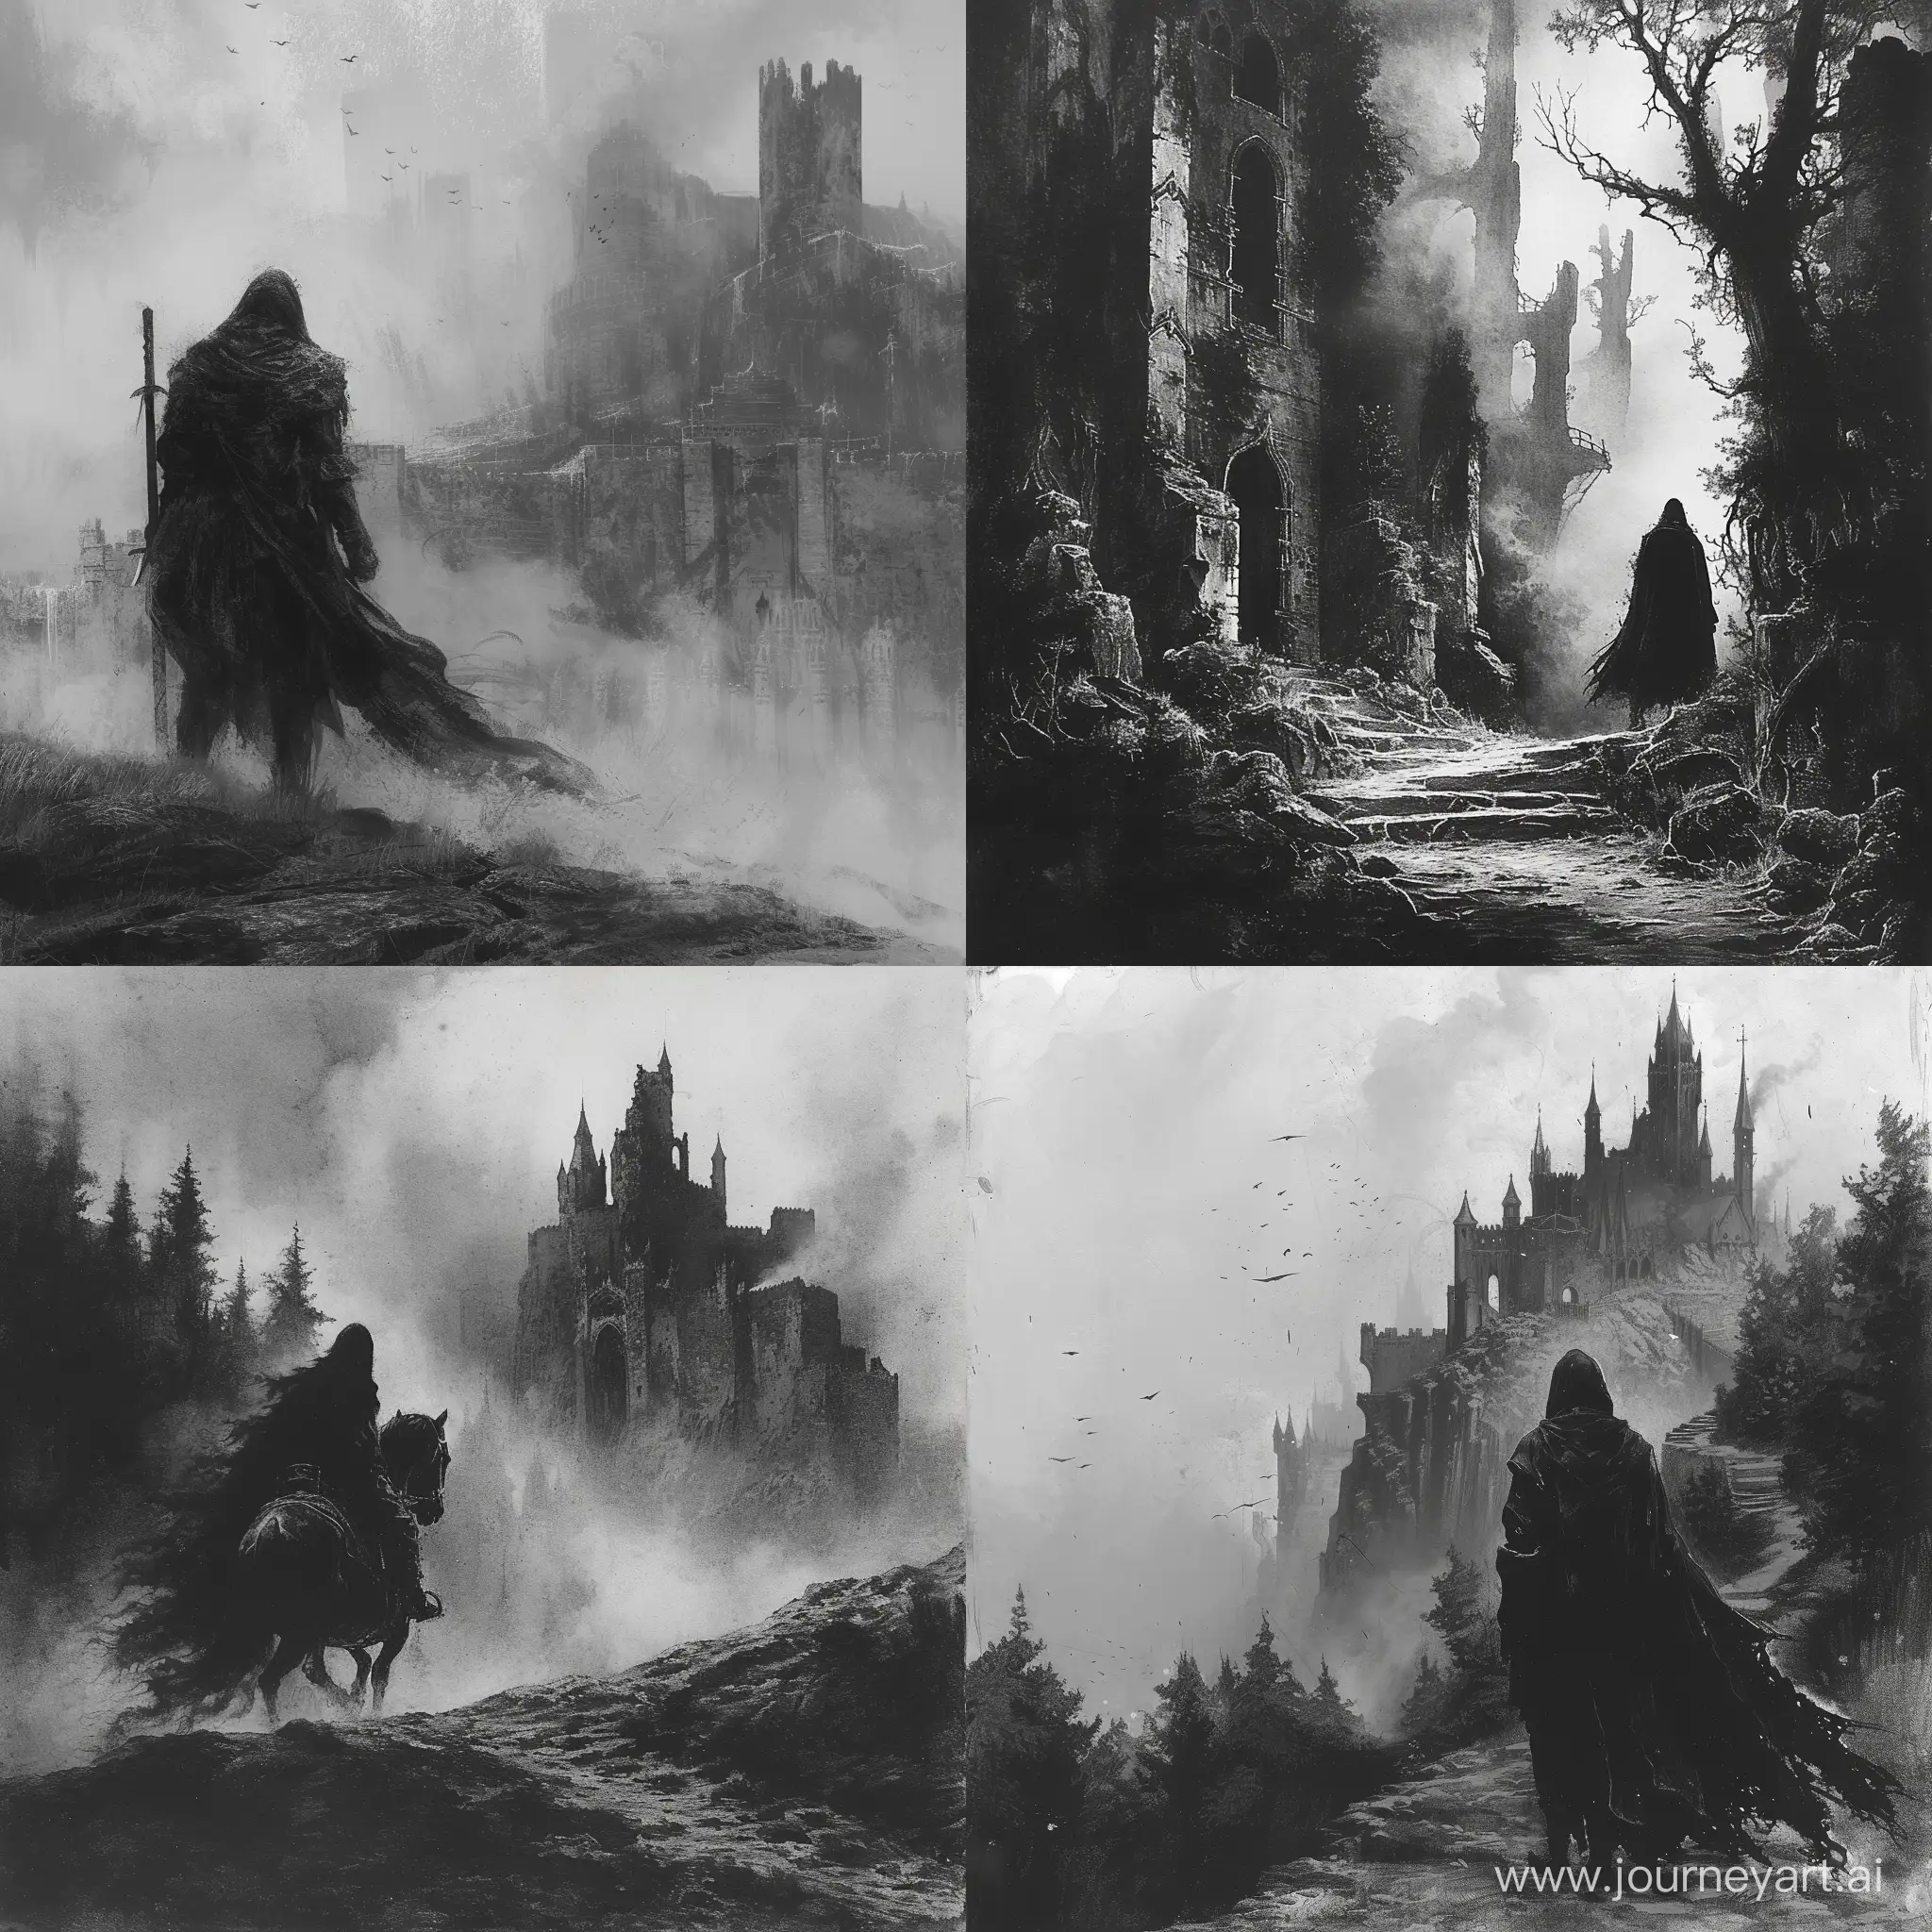 Medieval-Dark-Fantasy-Art-Gloomy-Black-and-White-Classic-Drawing